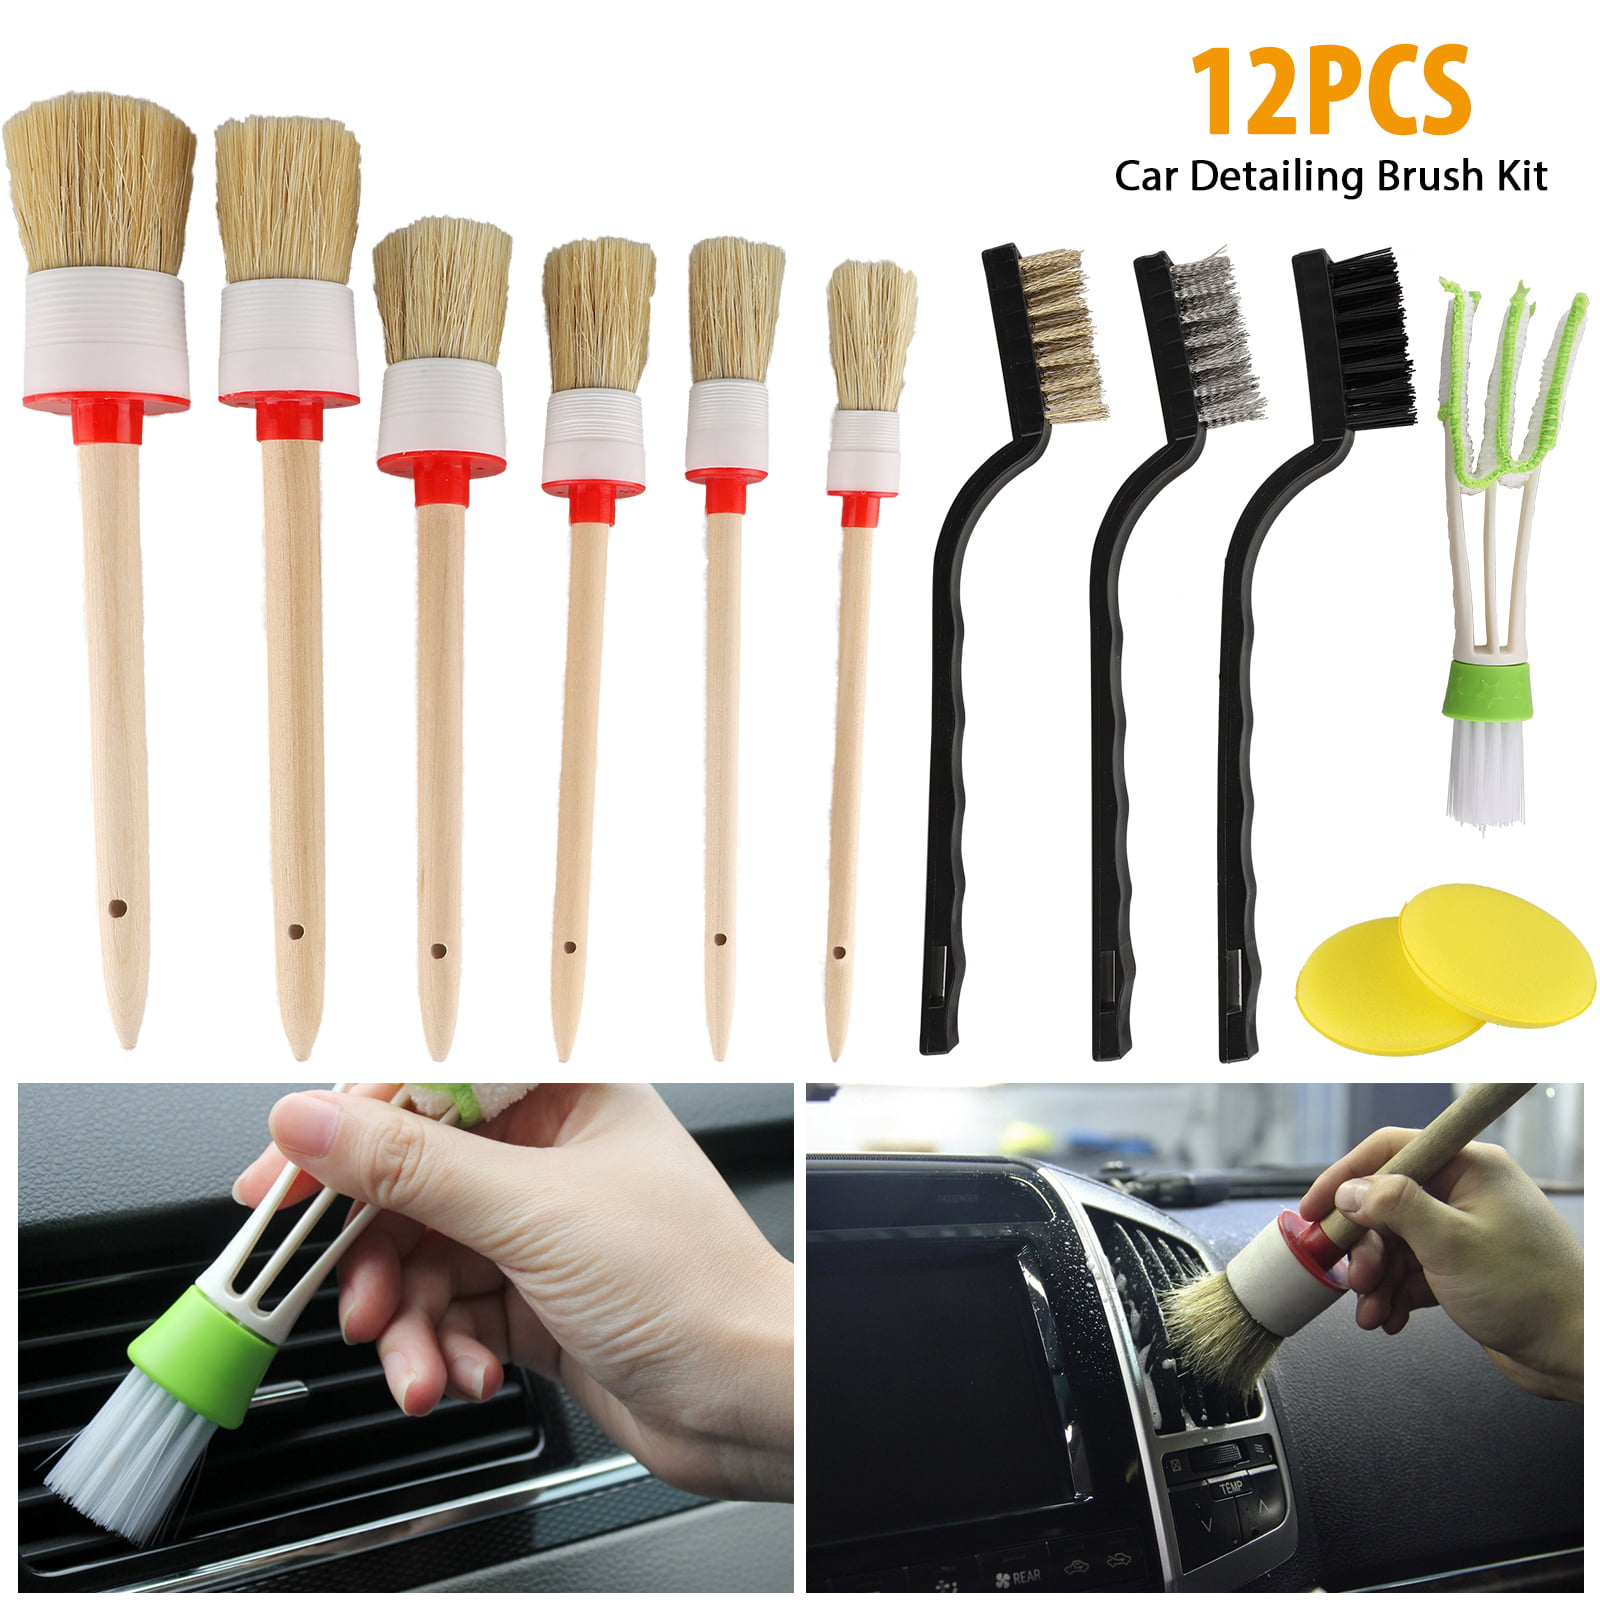 U/D Car Detailing Brush Set,Car Interior Cleaning Kit Car Detailing Supplies for Car Motorcycle Interior Exterior Leather Air Vents Clean 